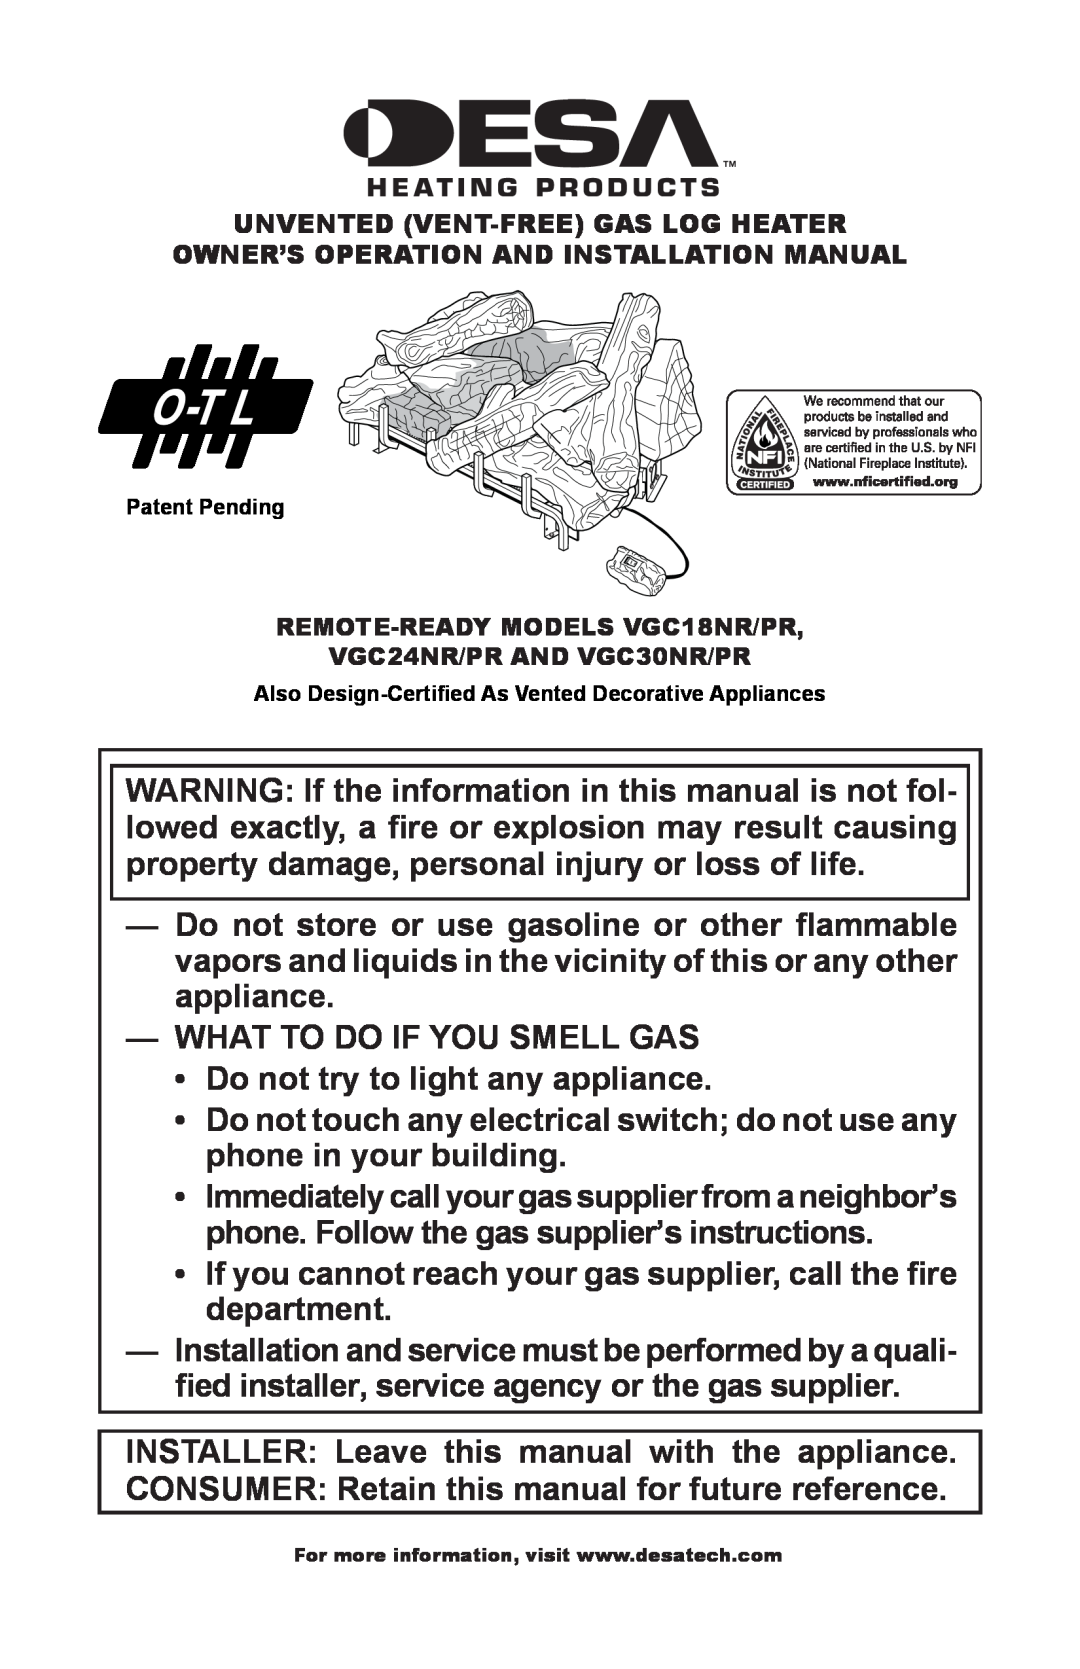 Desa VGC18NR/PR installation manual What To Do If You Smell Gas 